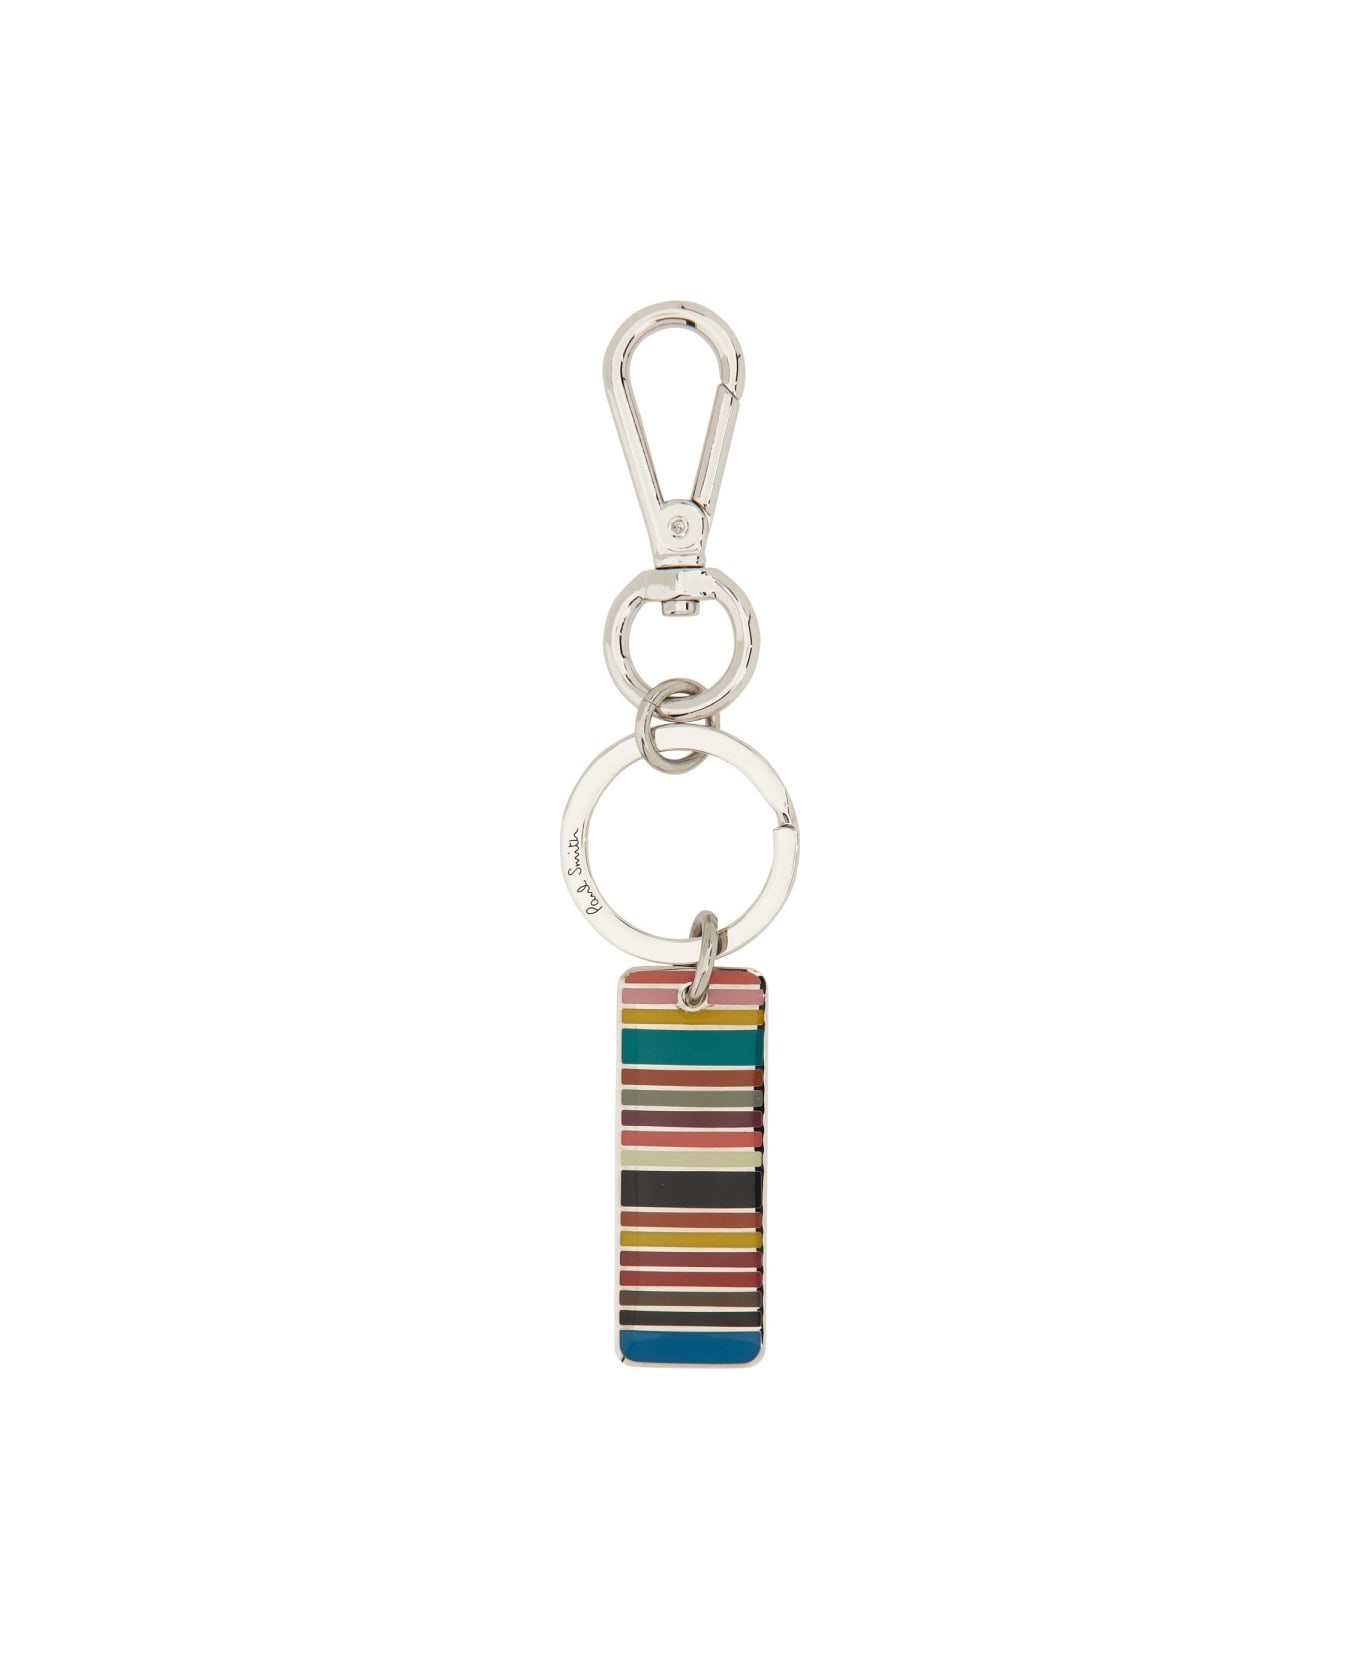 Paul Smith Key Holder With Logo - MULTICOLOUR キーリング